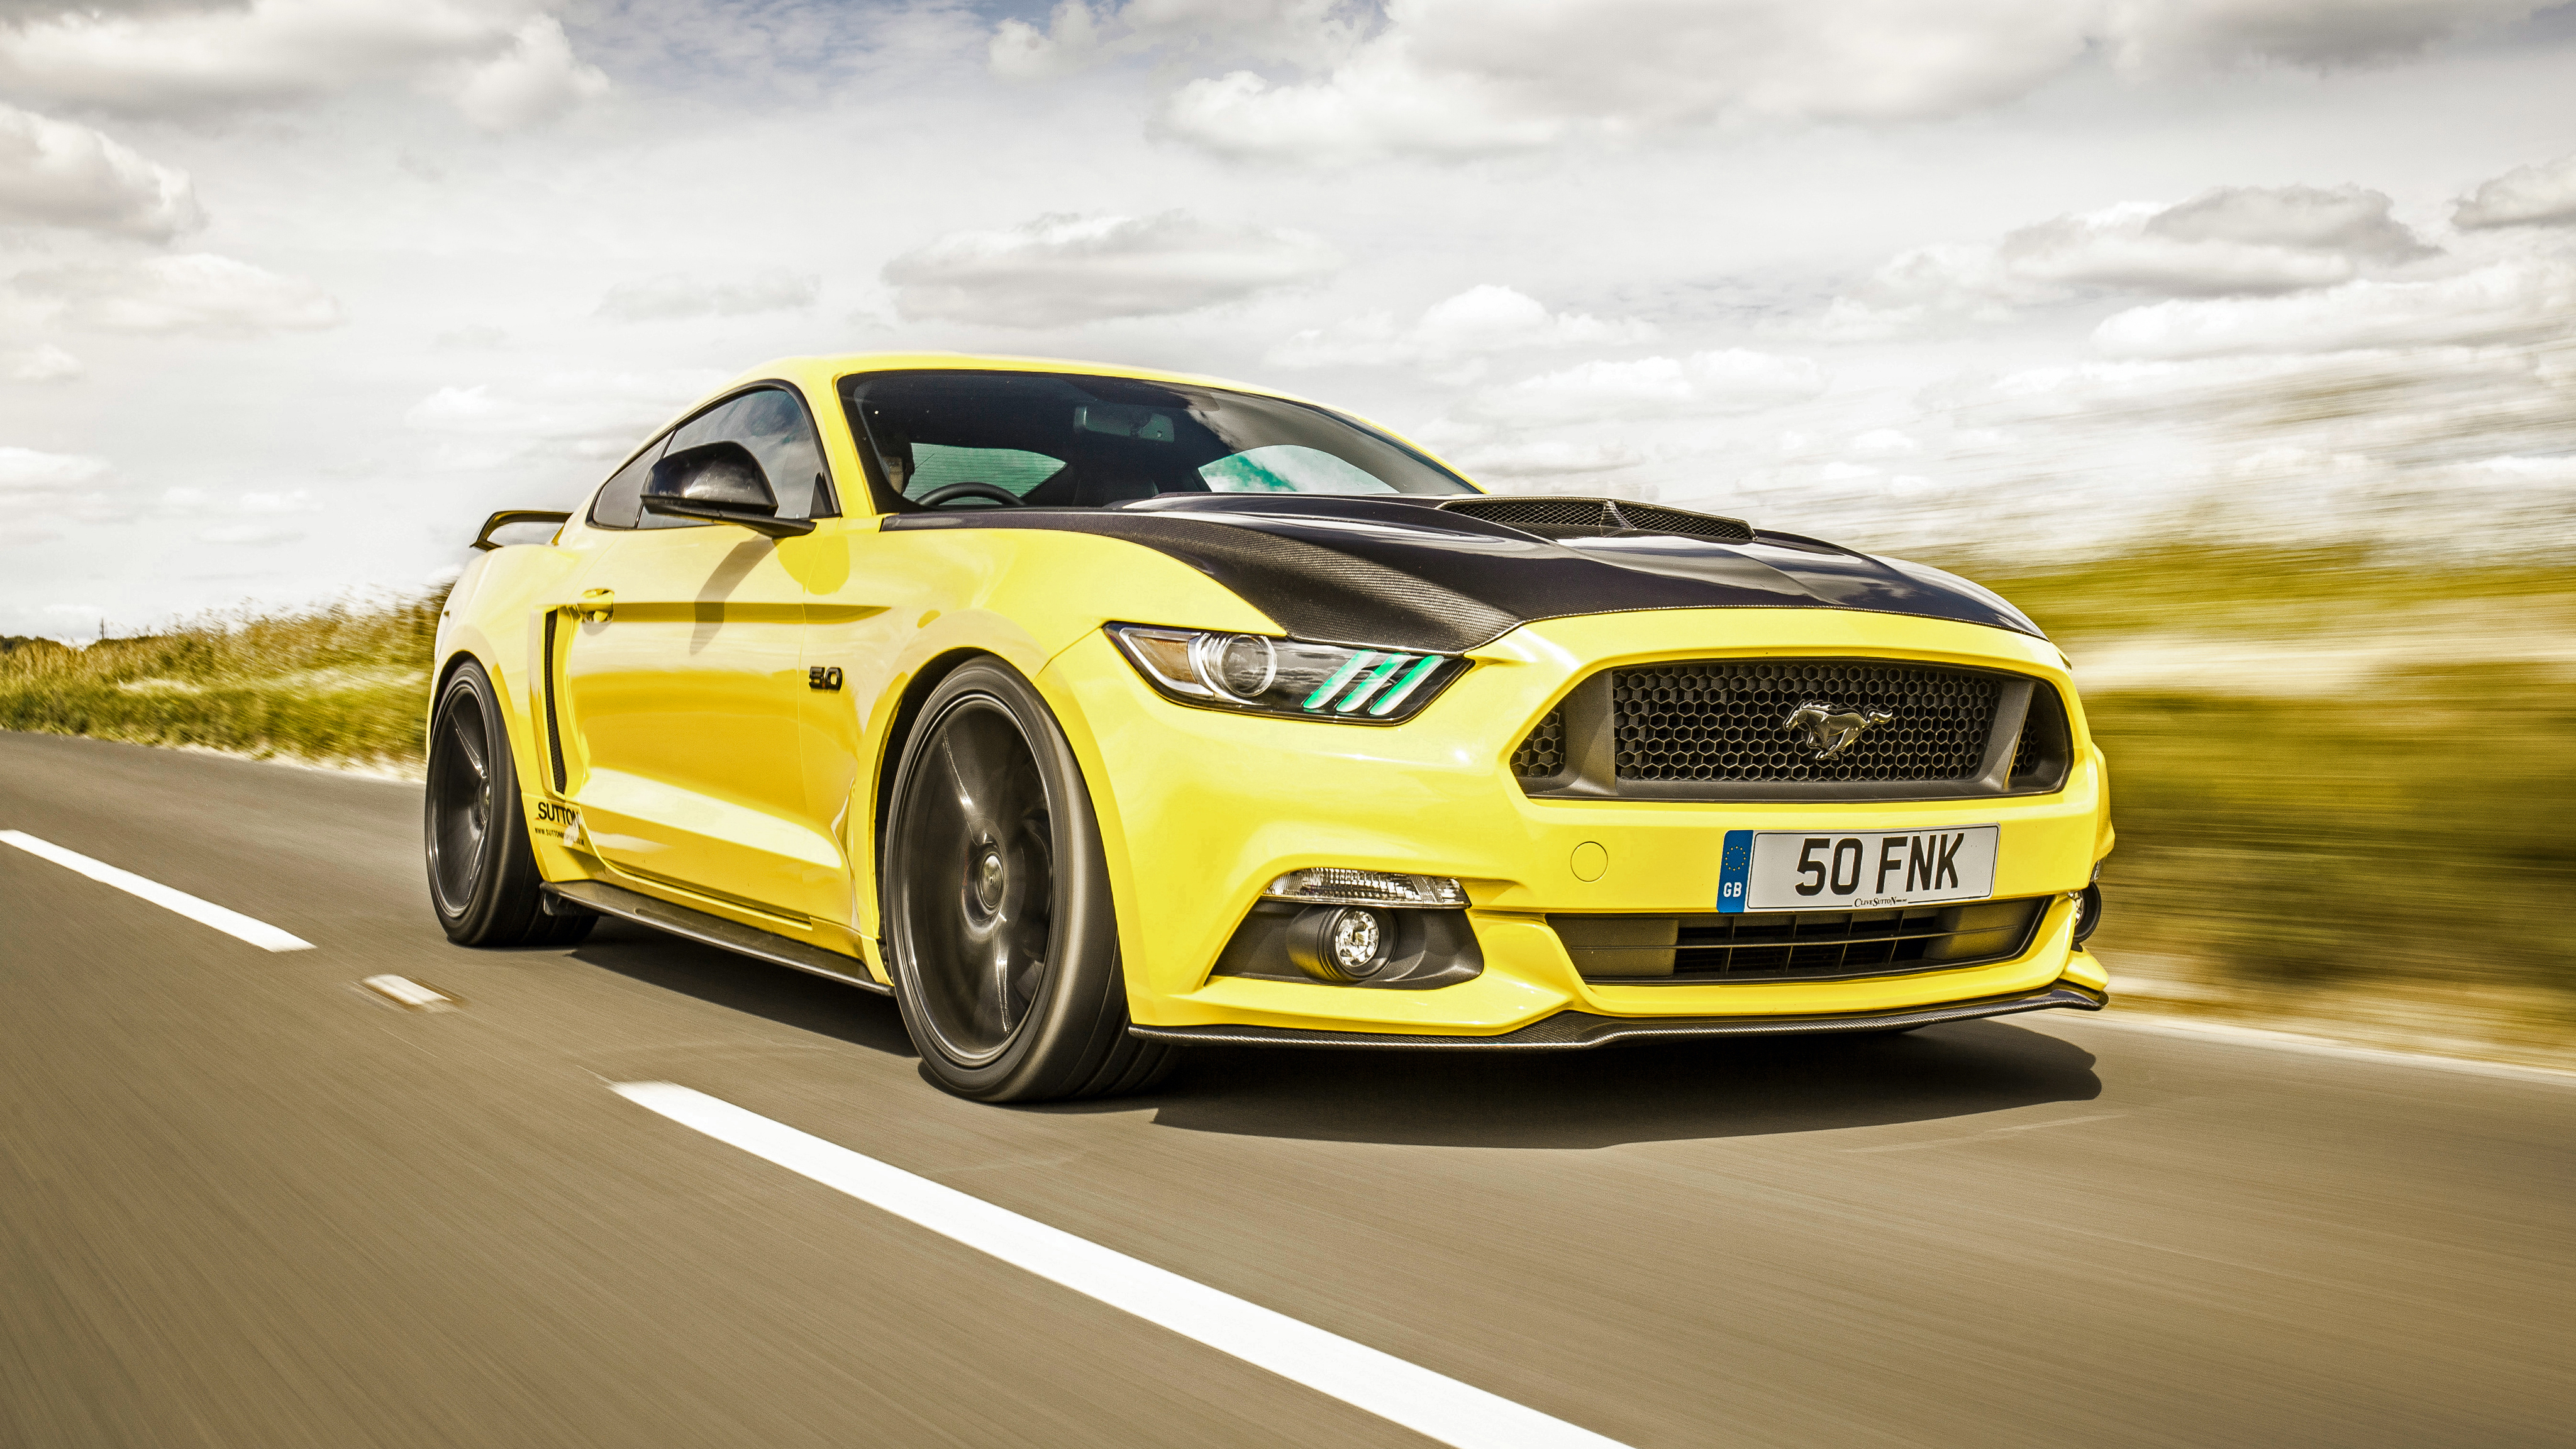 Ford Mustang Gt Wallpapers Pictures Images Images, Photos, Reviews